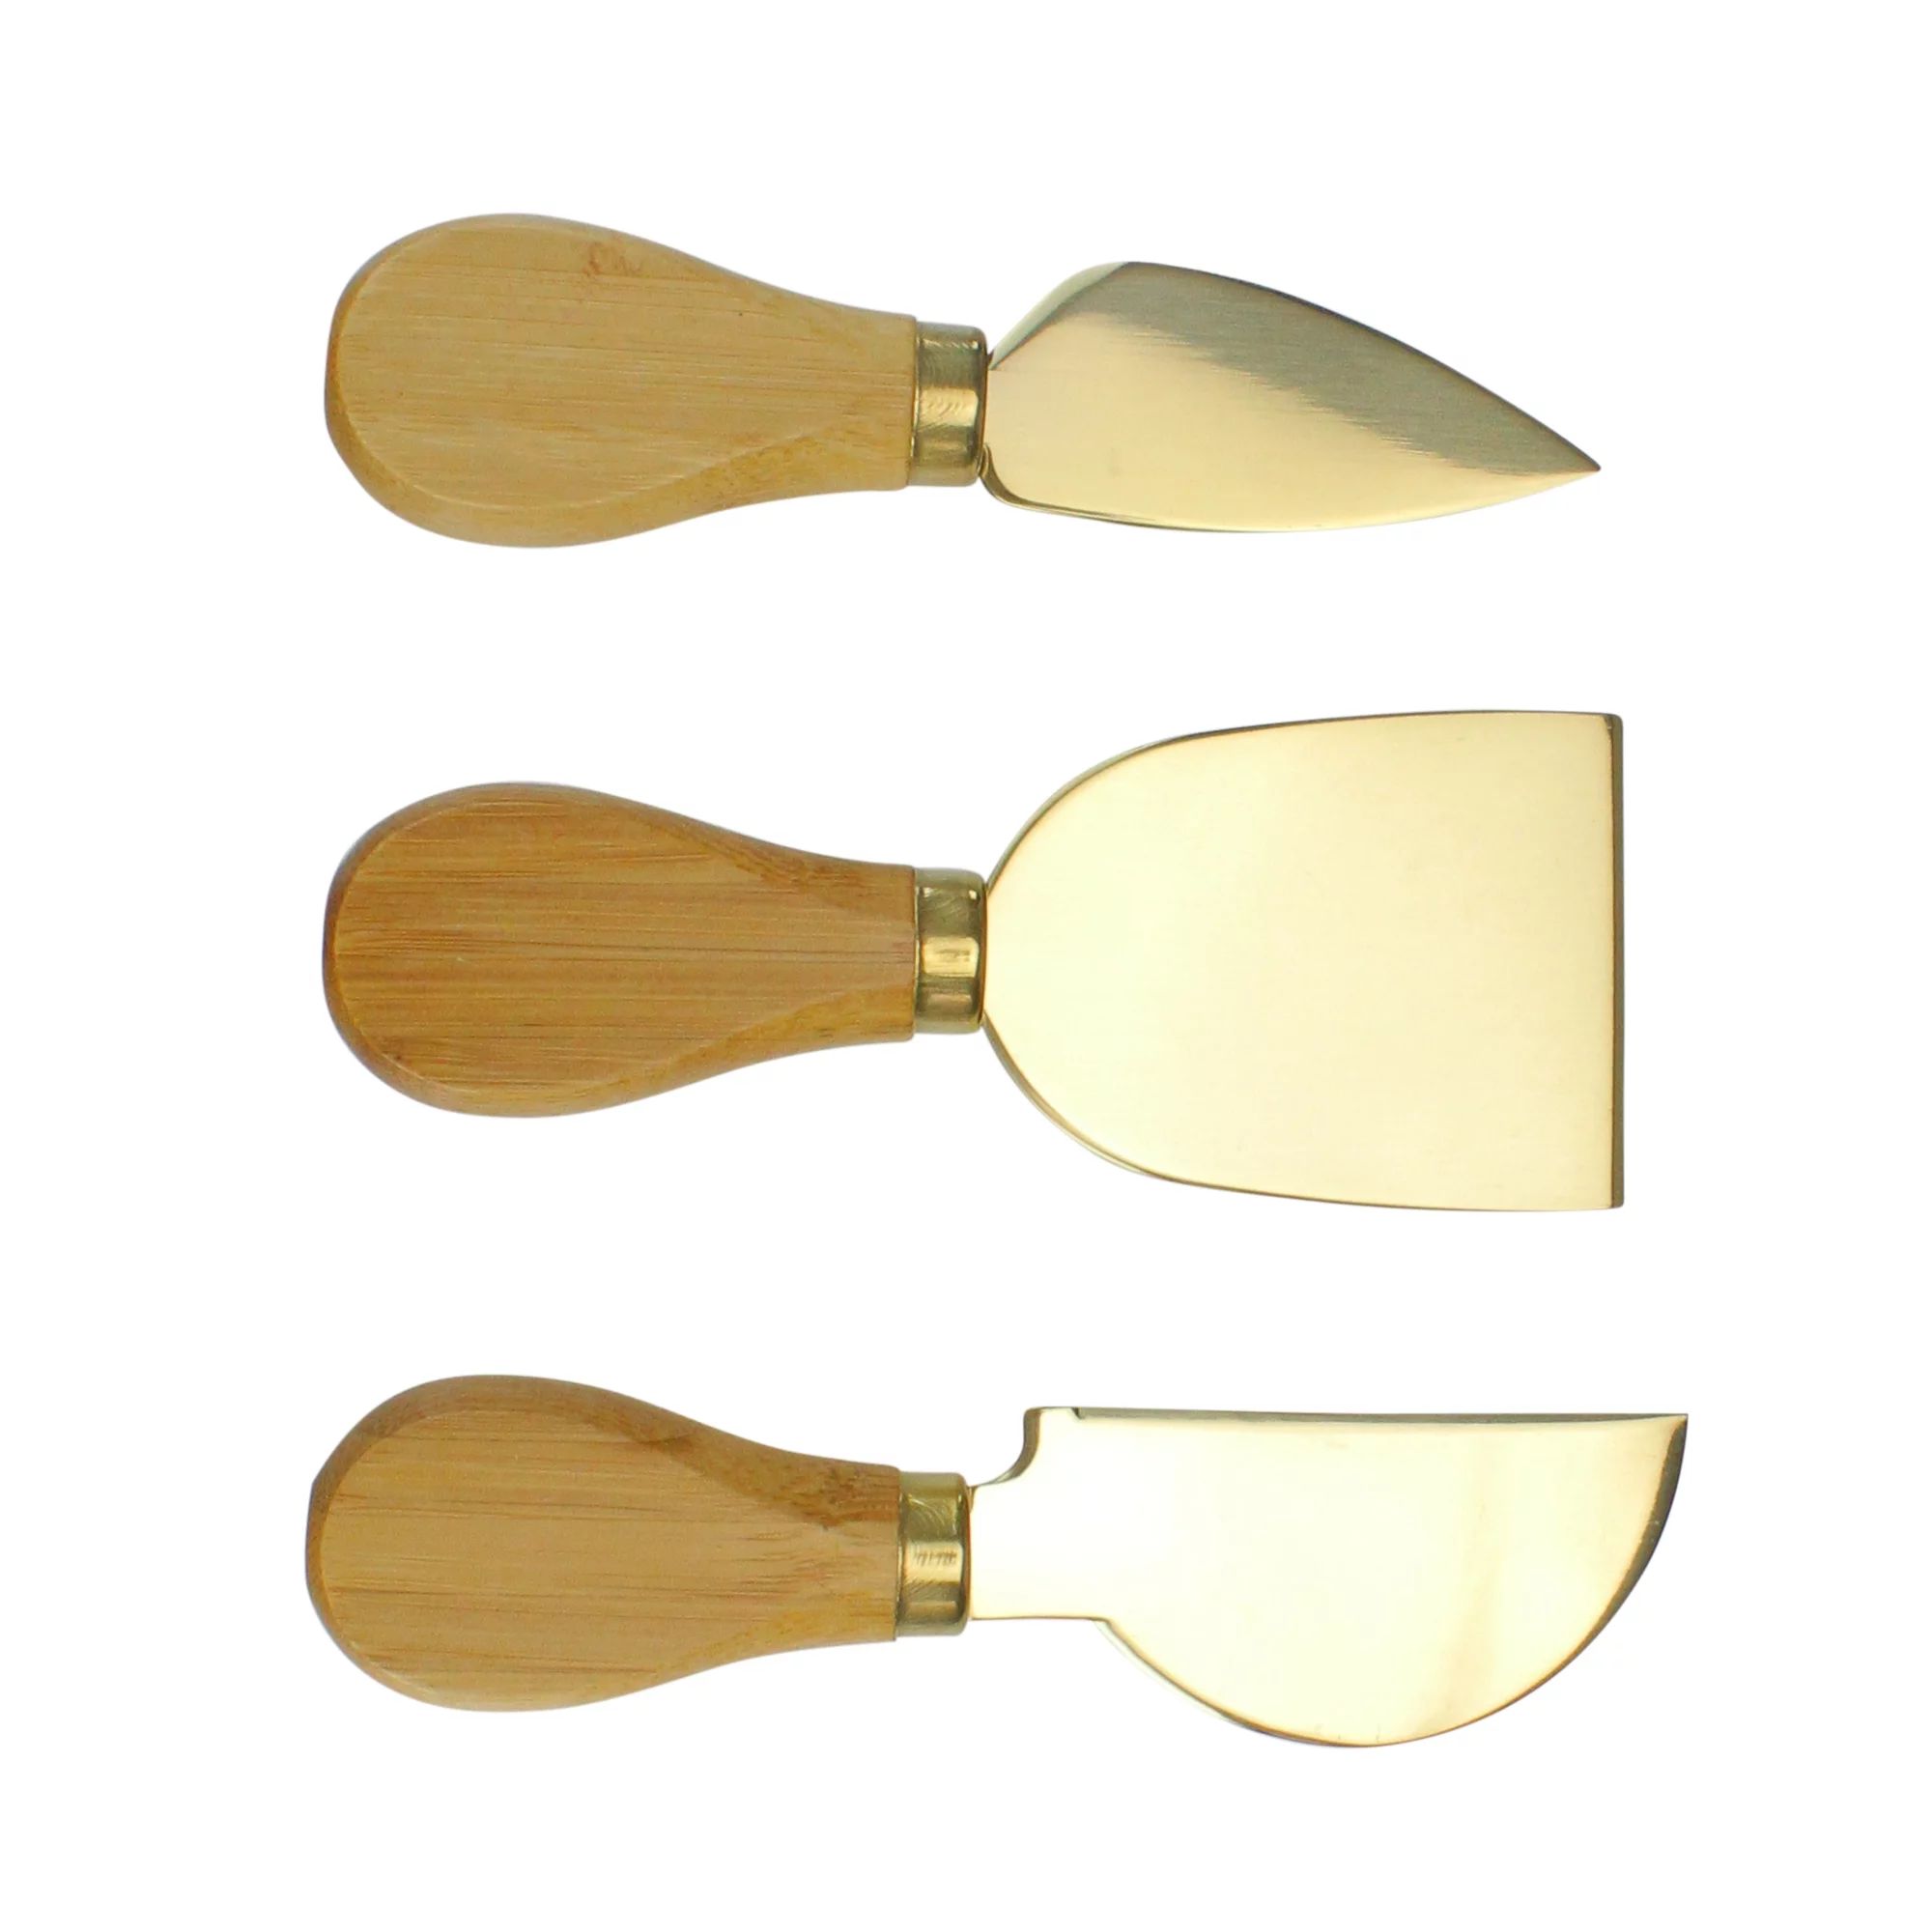 Set of 3 Golden Cheese Knives with Bamboo Handle 5" | Walmart (US)